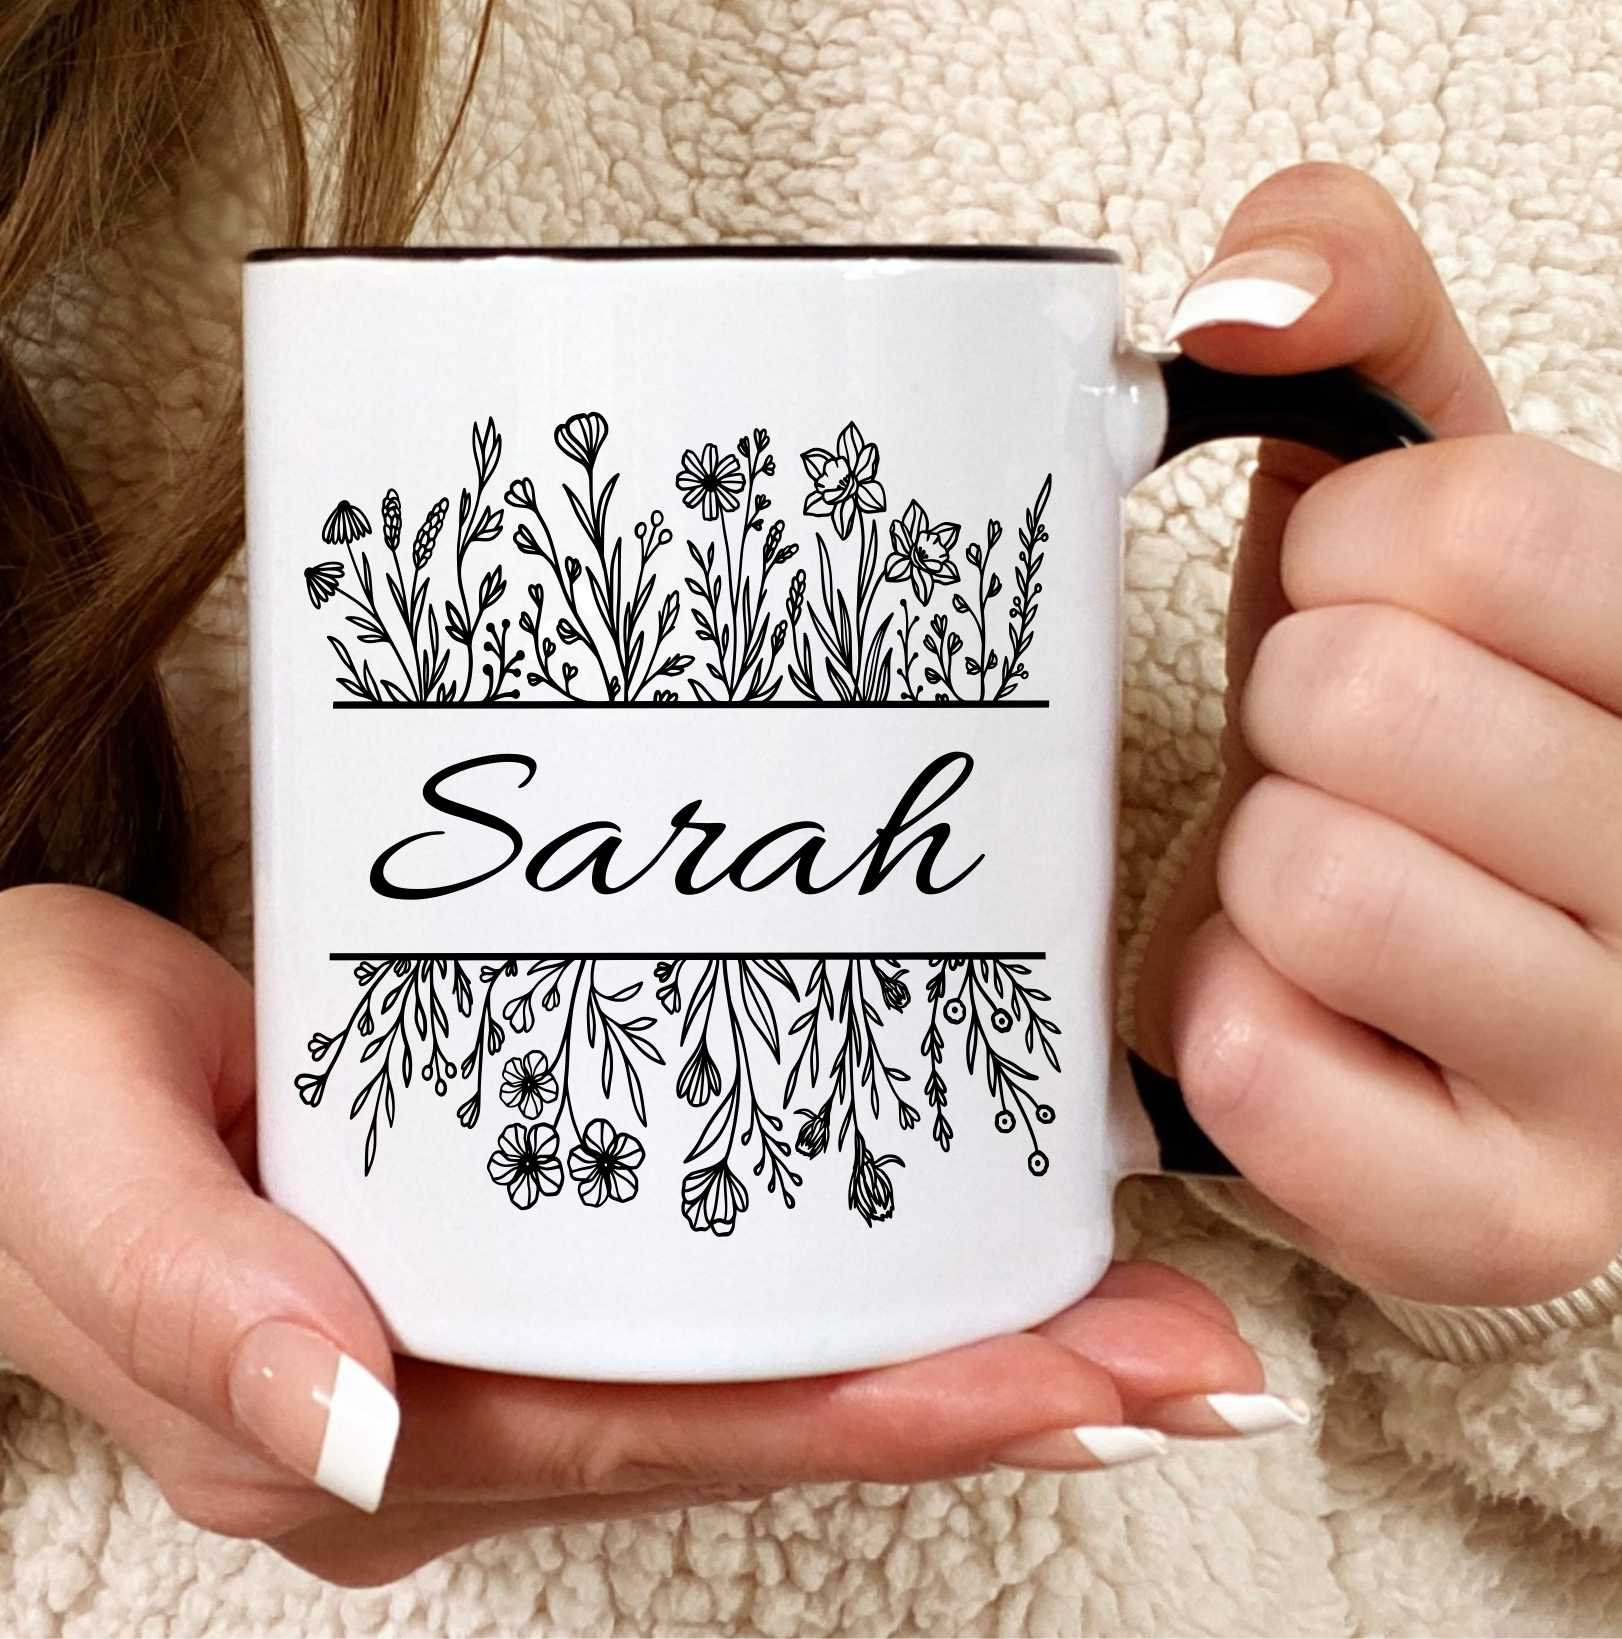 Discover Custom Mug, Personalized Gift for her, Coffee lover Custom Mug, Personalized Mug with Name, Best Friend, Unique Gift, Valentines Day, Gift